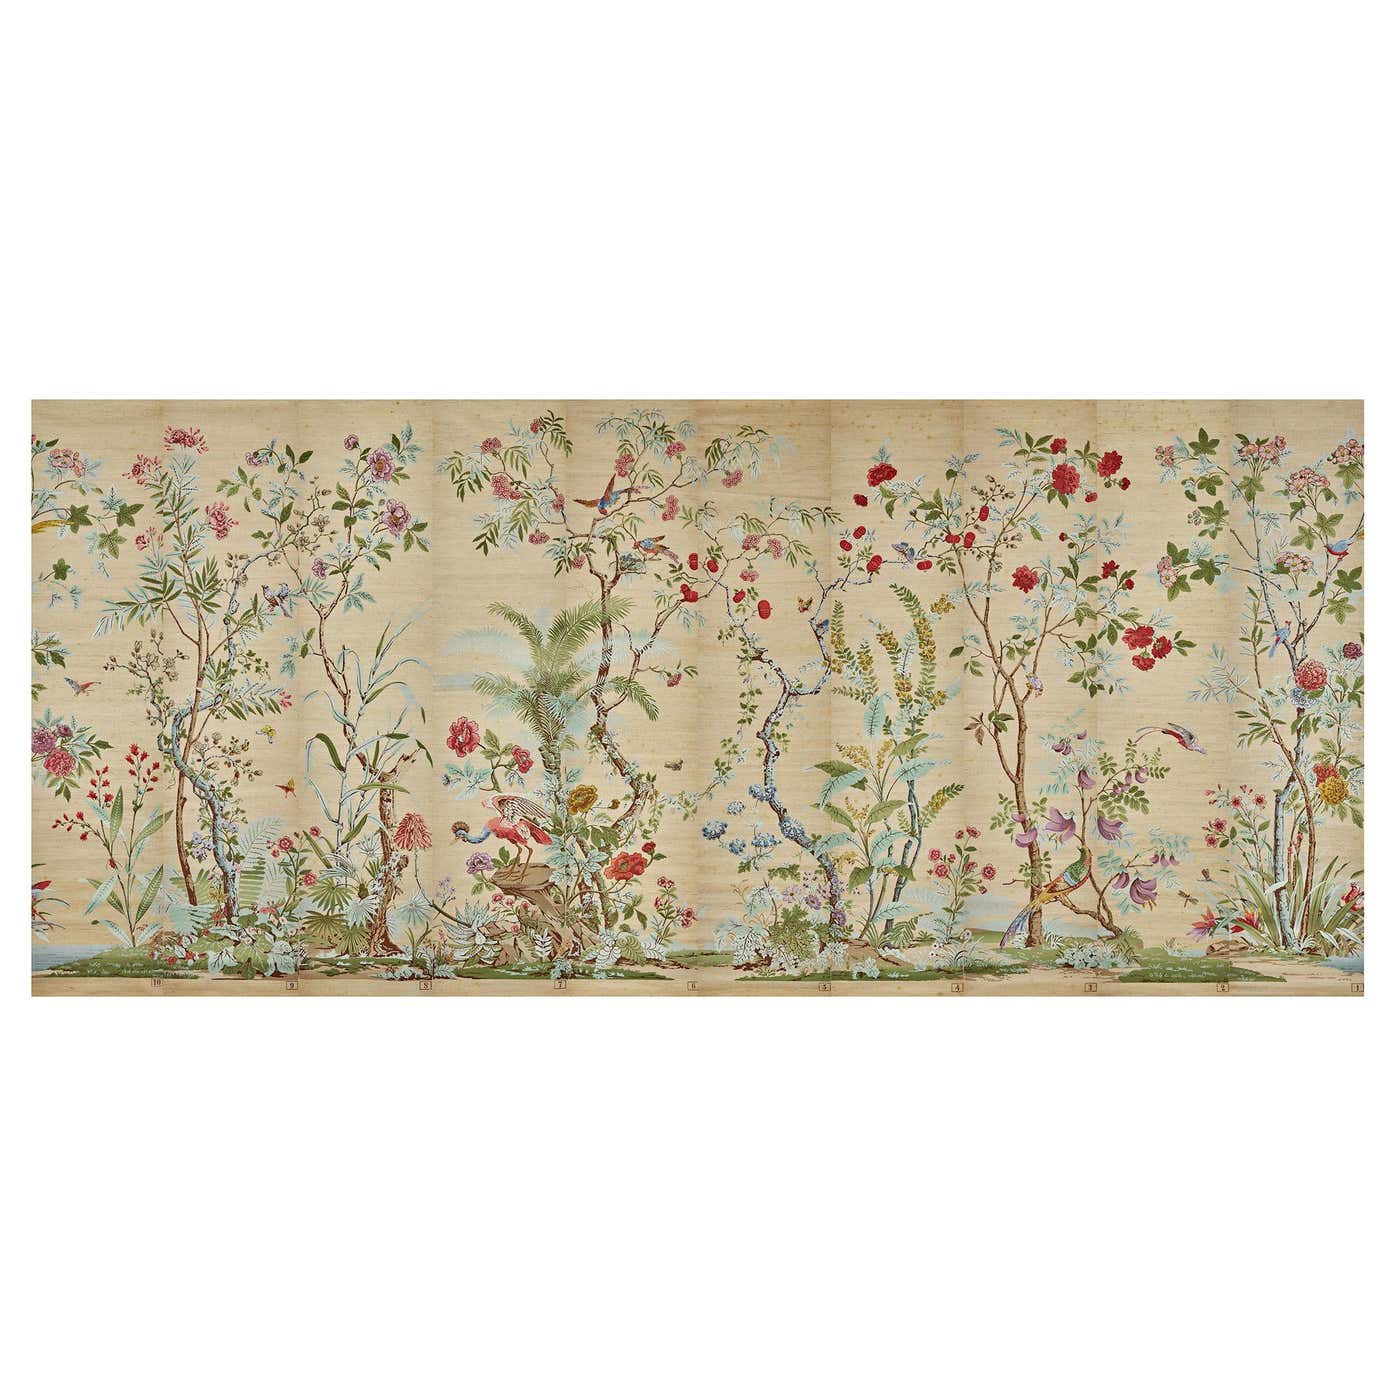 Zuber, 'Decor Chinois' Hand Wood Blocked on Grasscloth Scenic Wallpaper ...